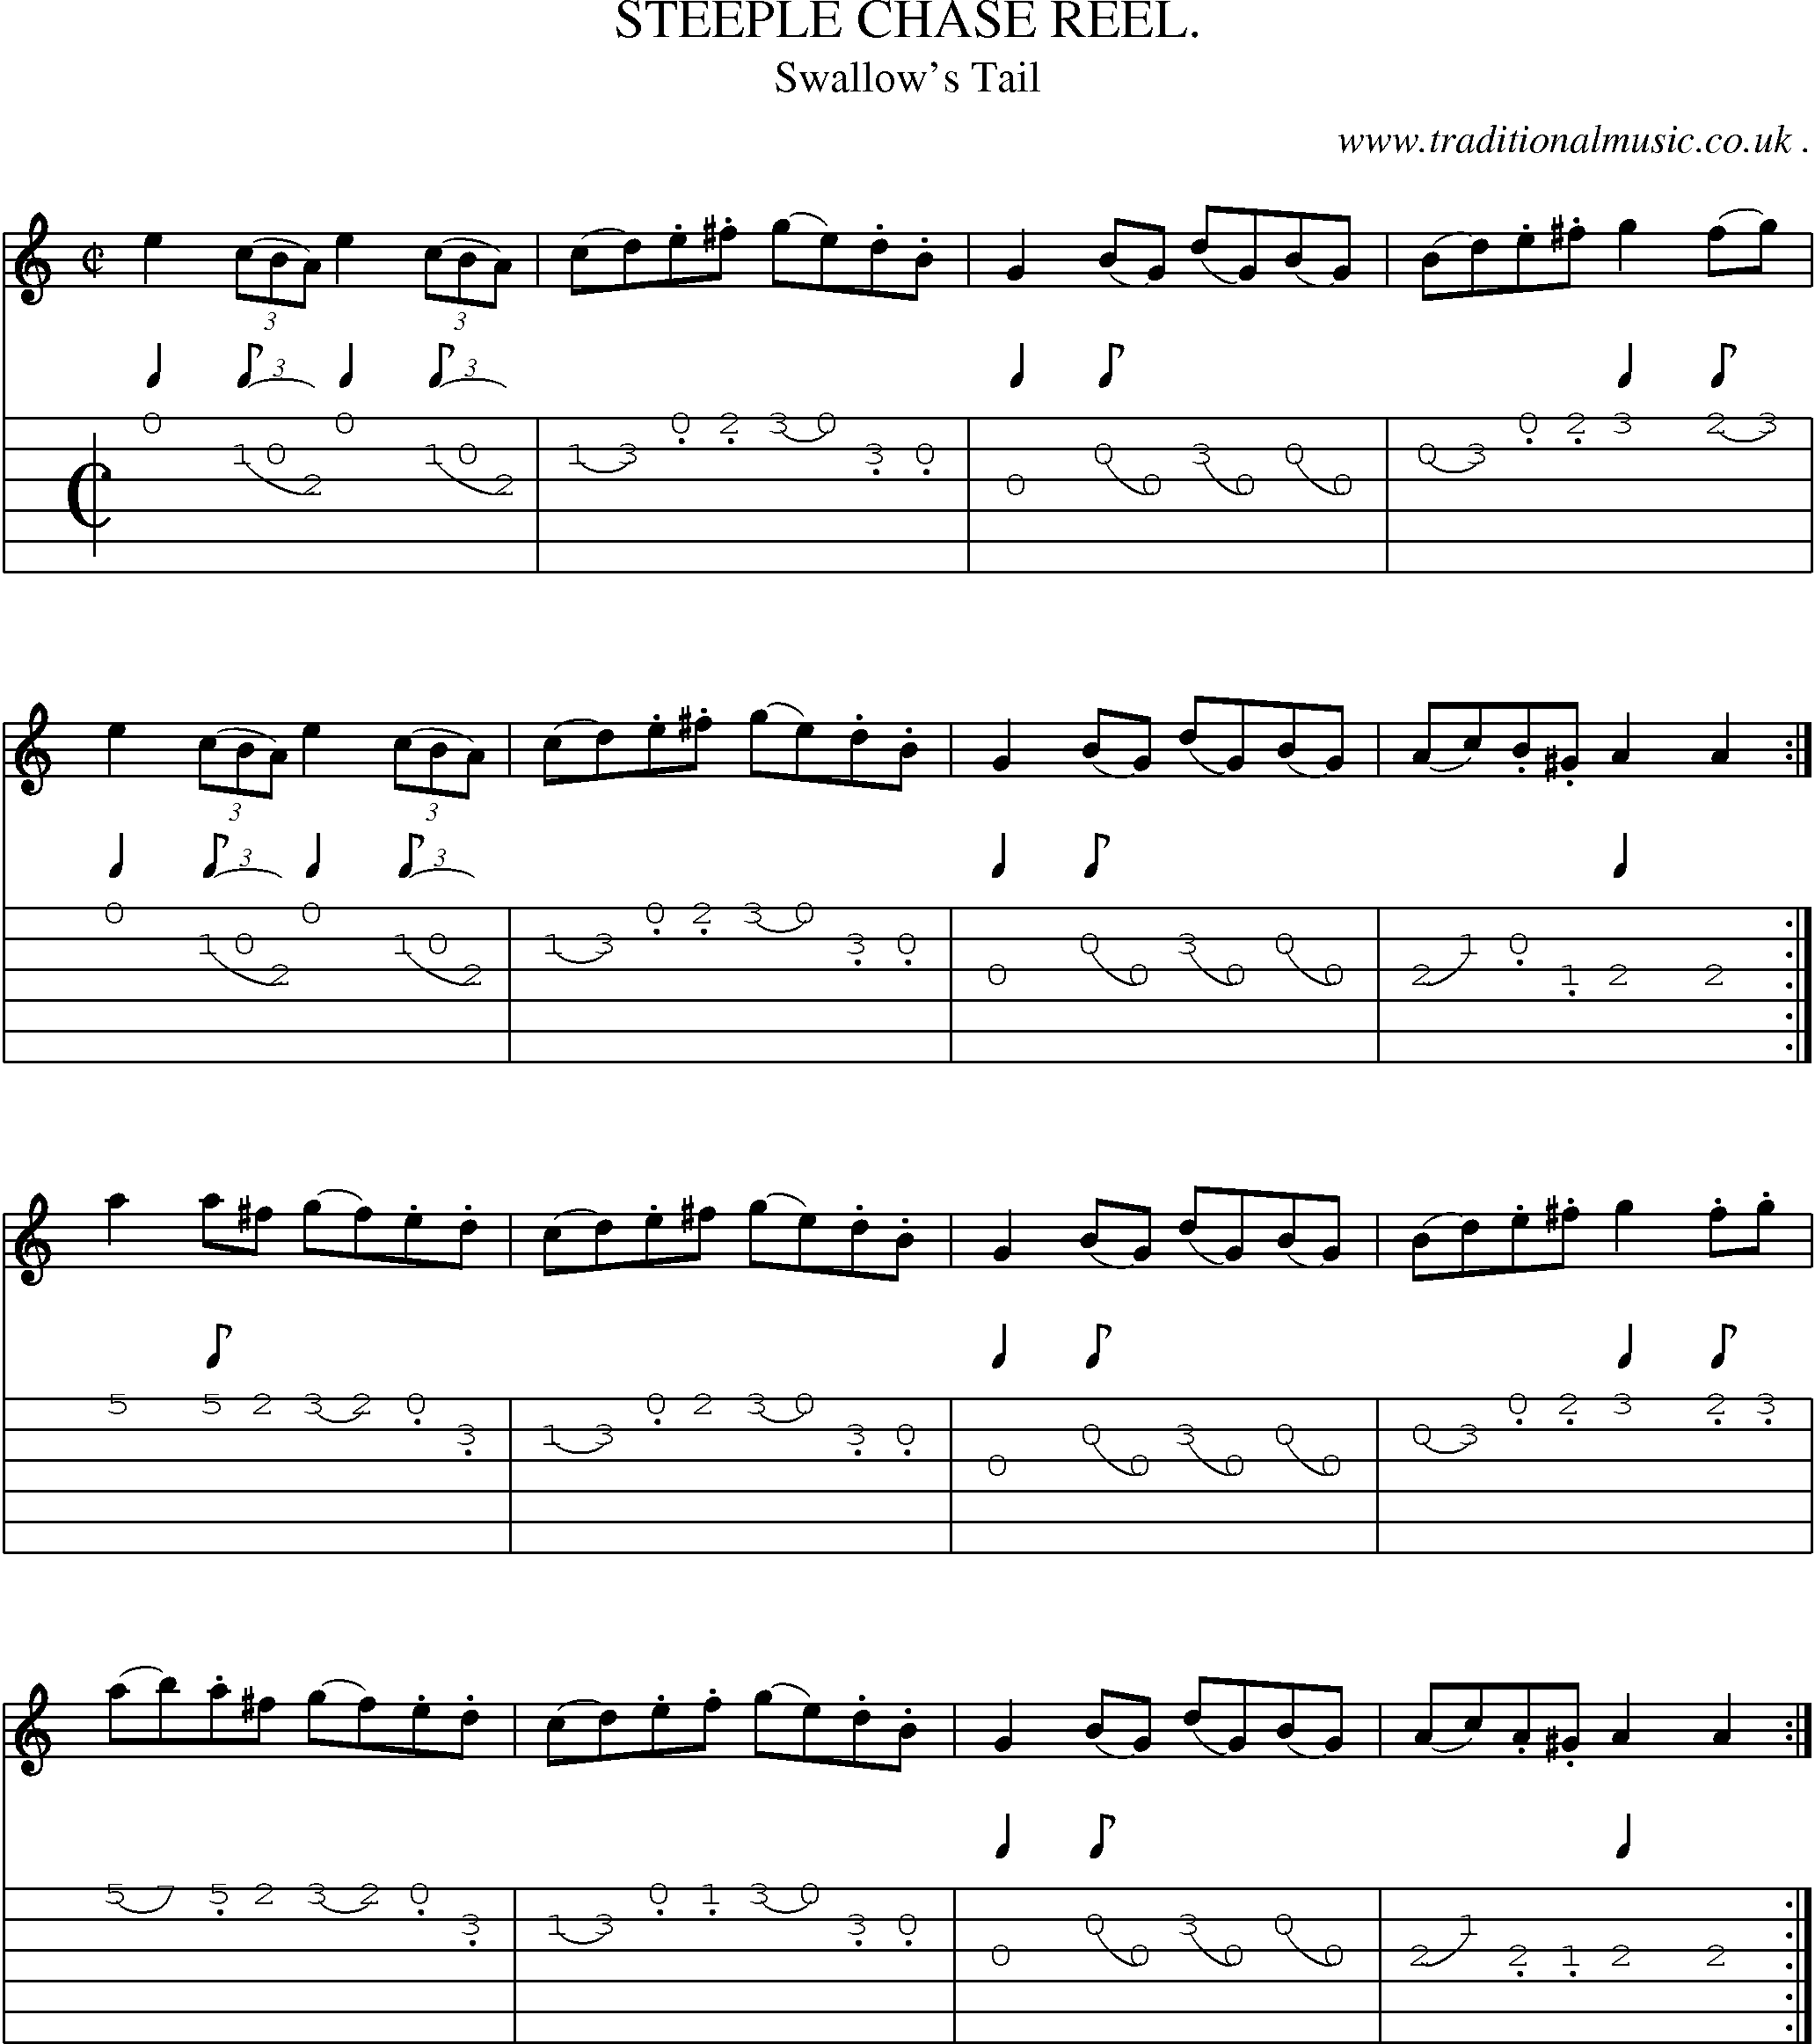 Sheet-Music and Guitar Tabs for Steeple Chase Reel